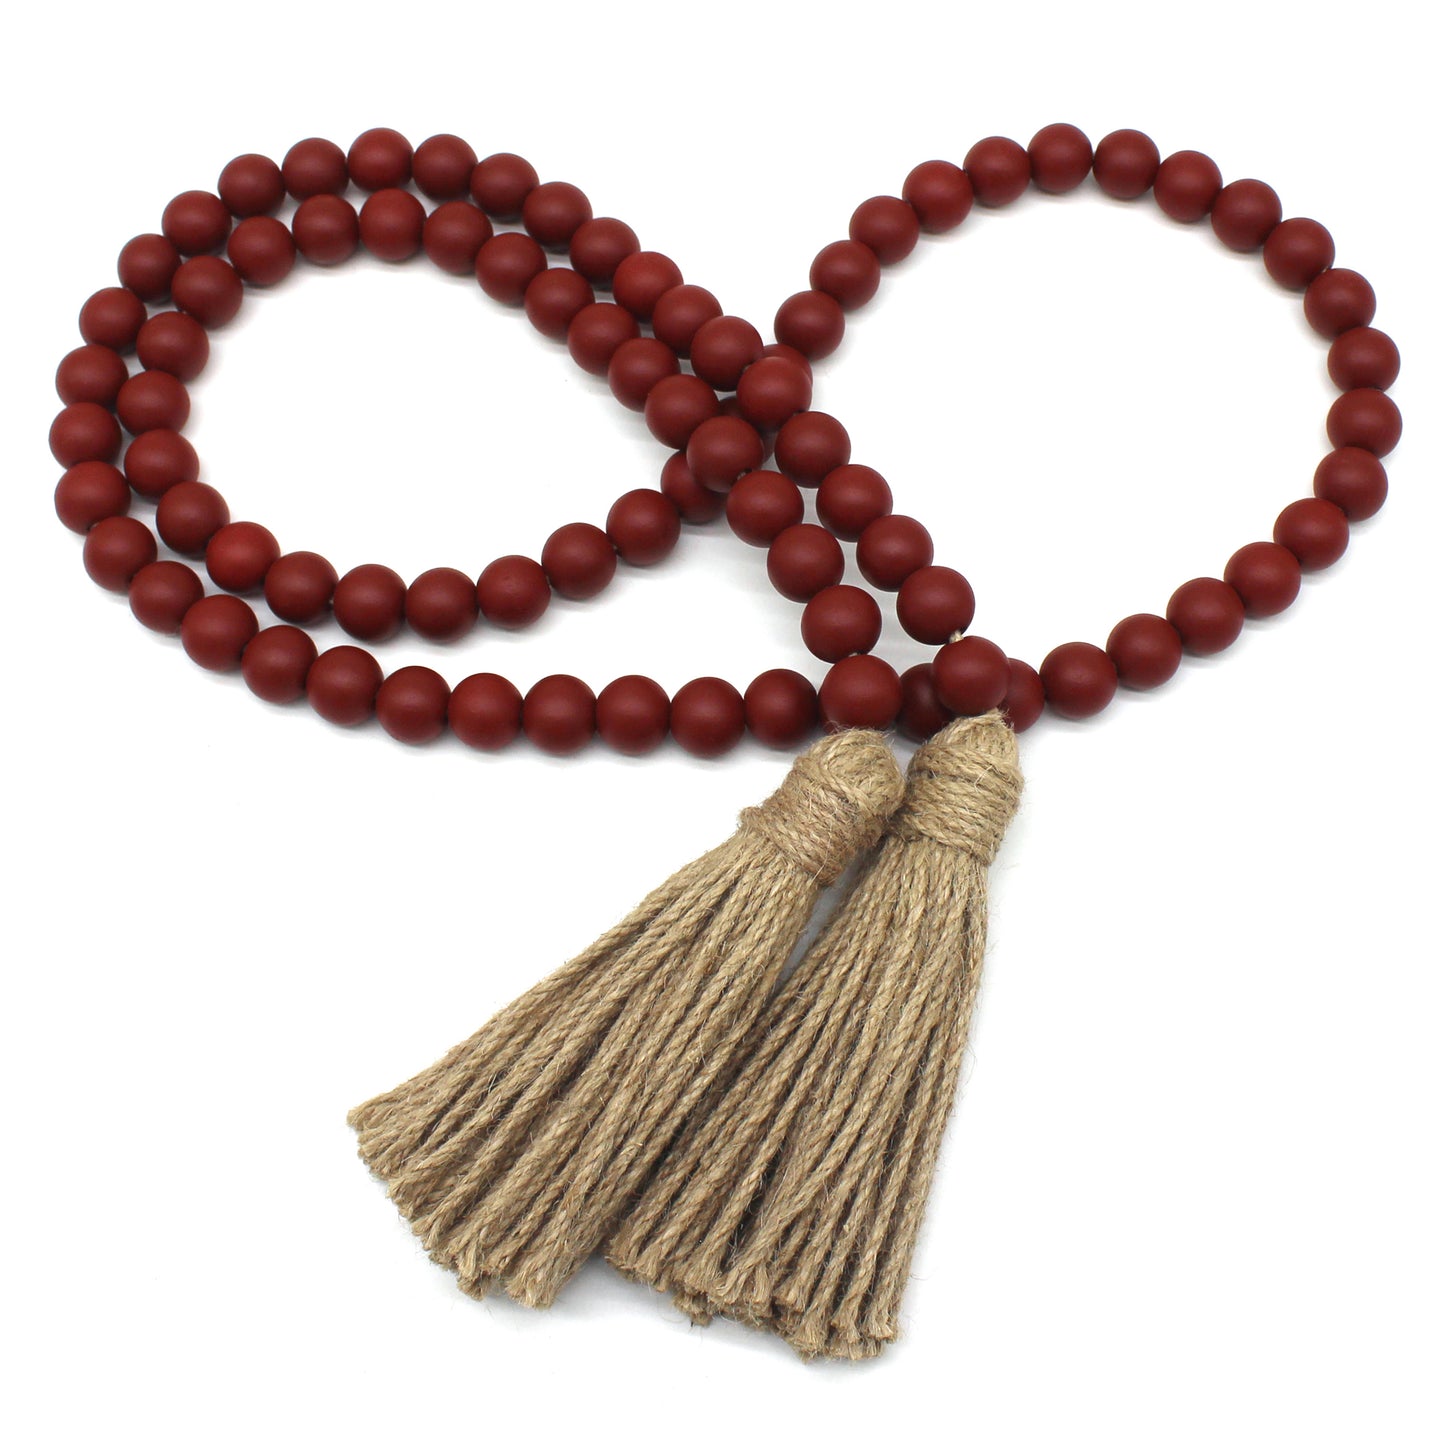 CVHOMEDECO. Wood Beads Garland with Tassels Farmhouse Rustic Wooden Prayer Bead String Wall Hanging Accent for Home Festival Decor. Burgundy